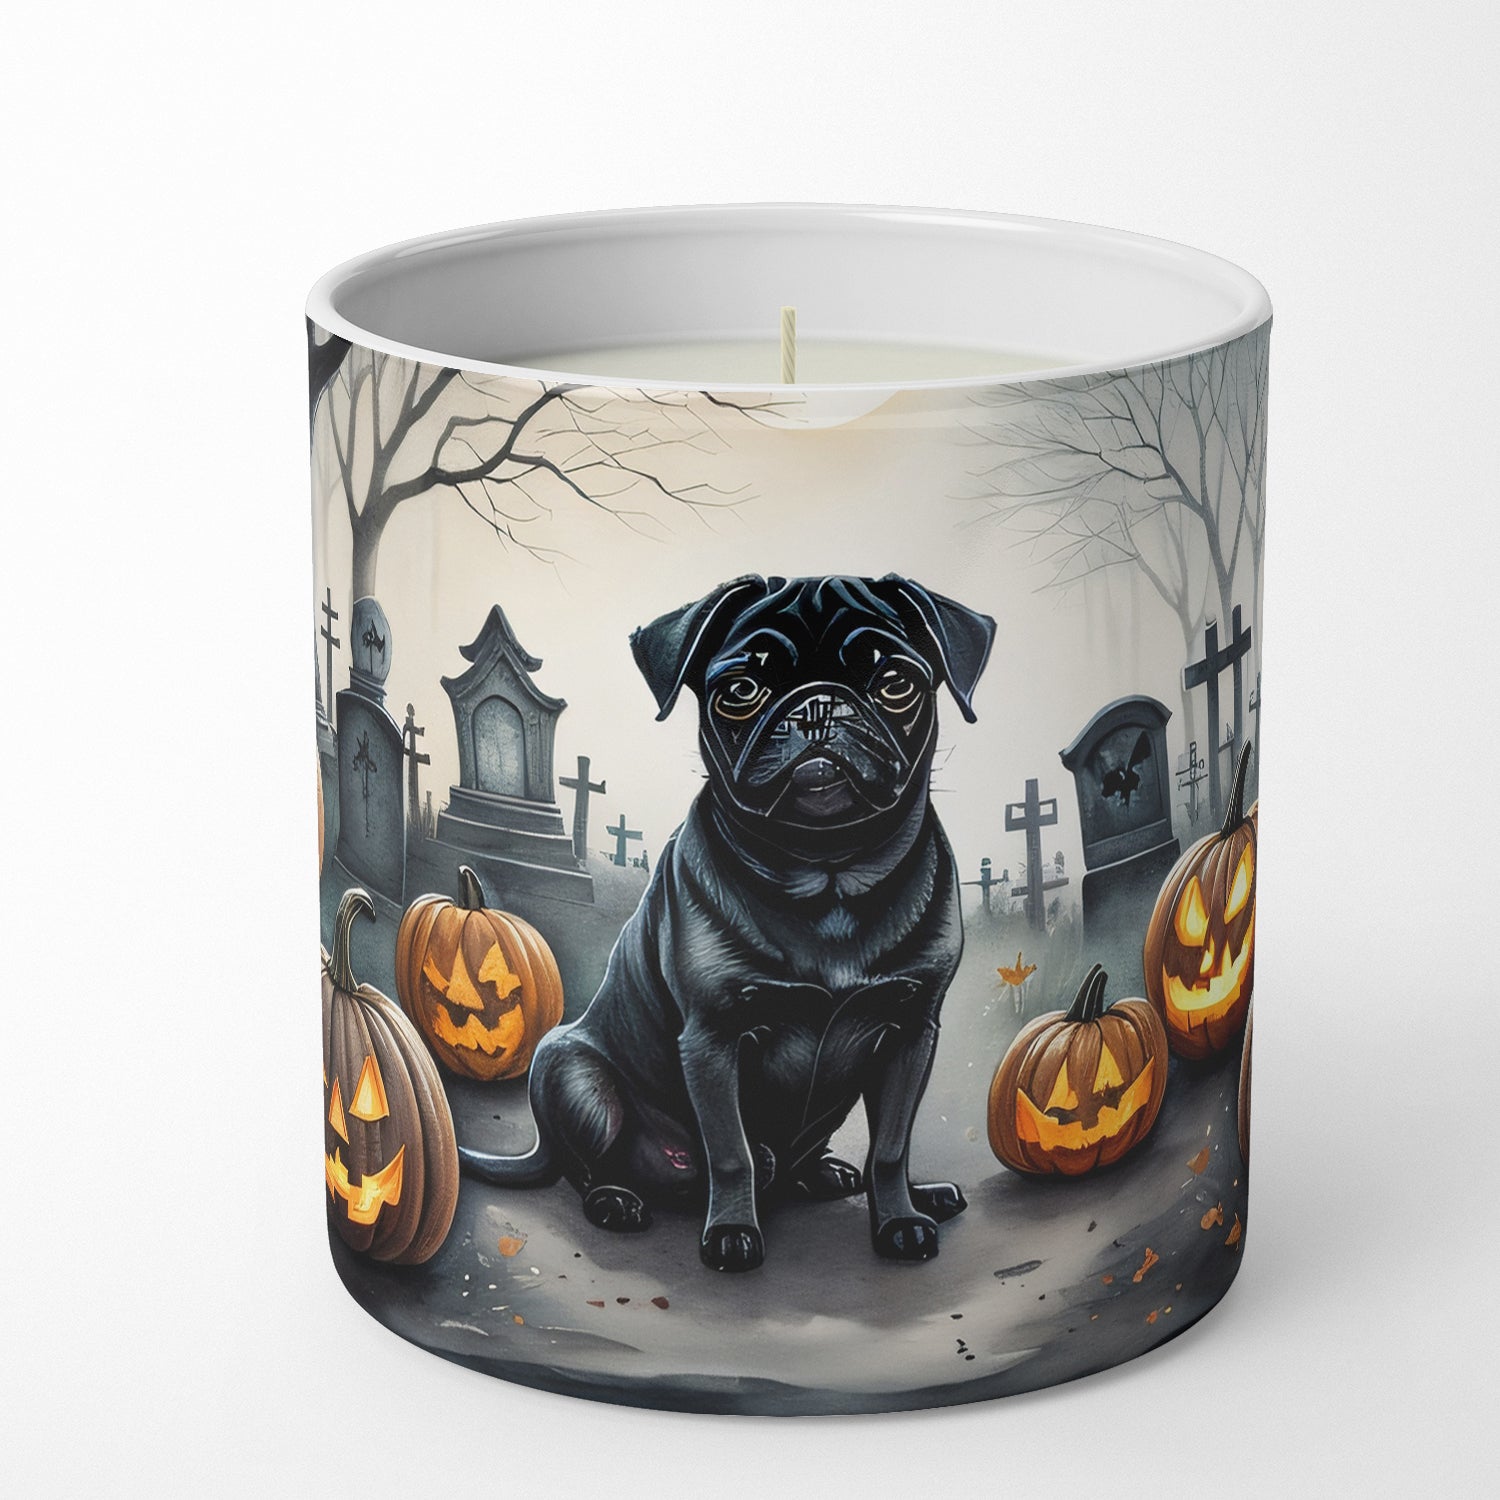 Buy this Black Pug Spooky Halloween Decorative Soy Candle